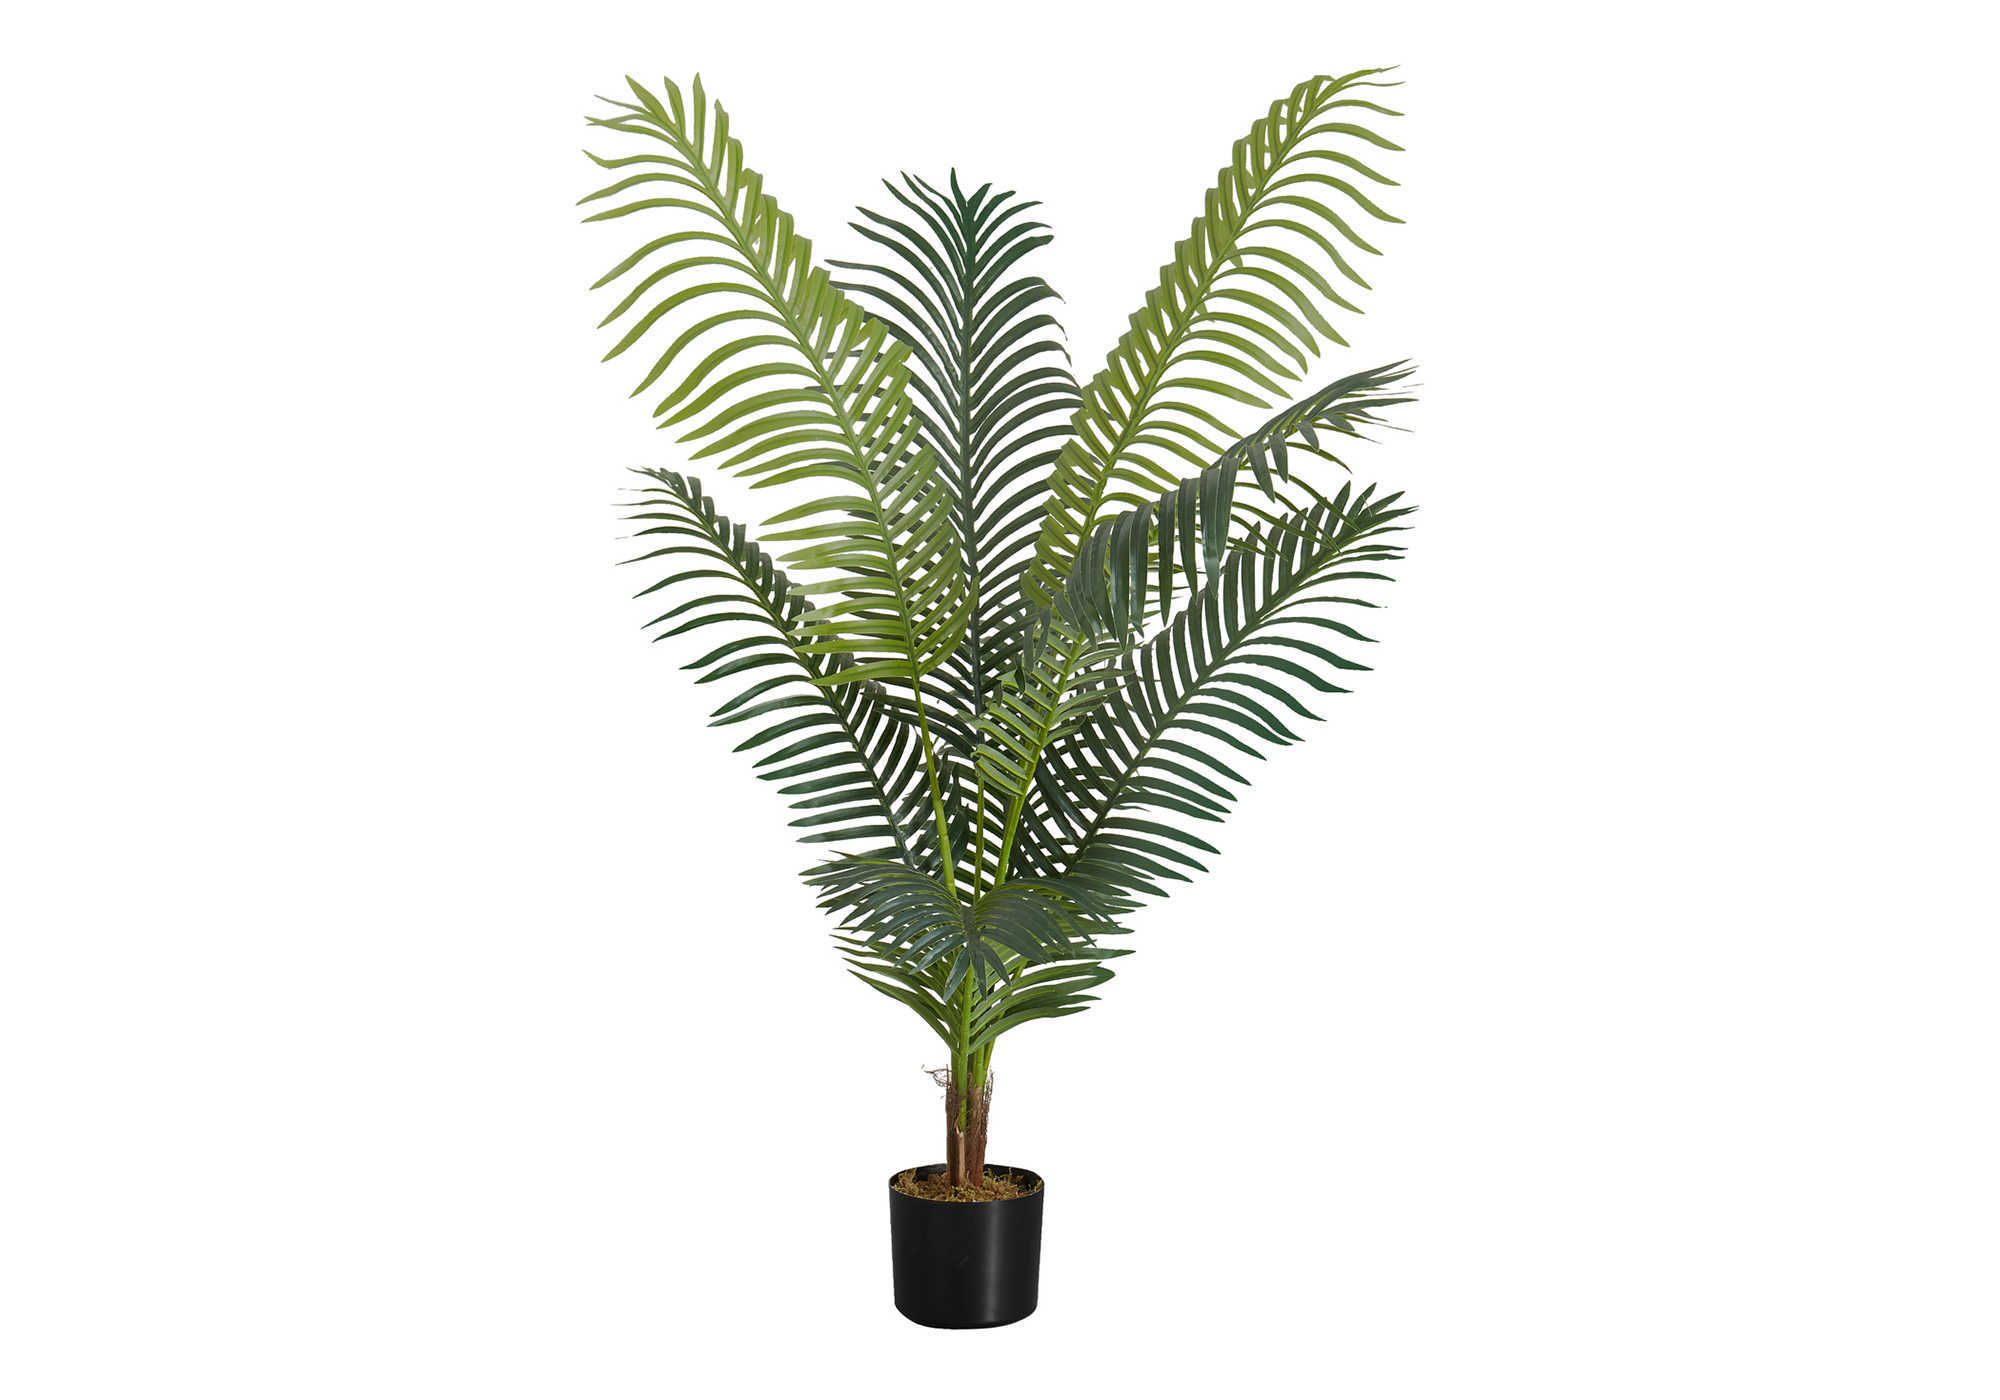 ARTIFICIAL PLANT - 47"H / INDOOR PALM TREE IN A 5" POT